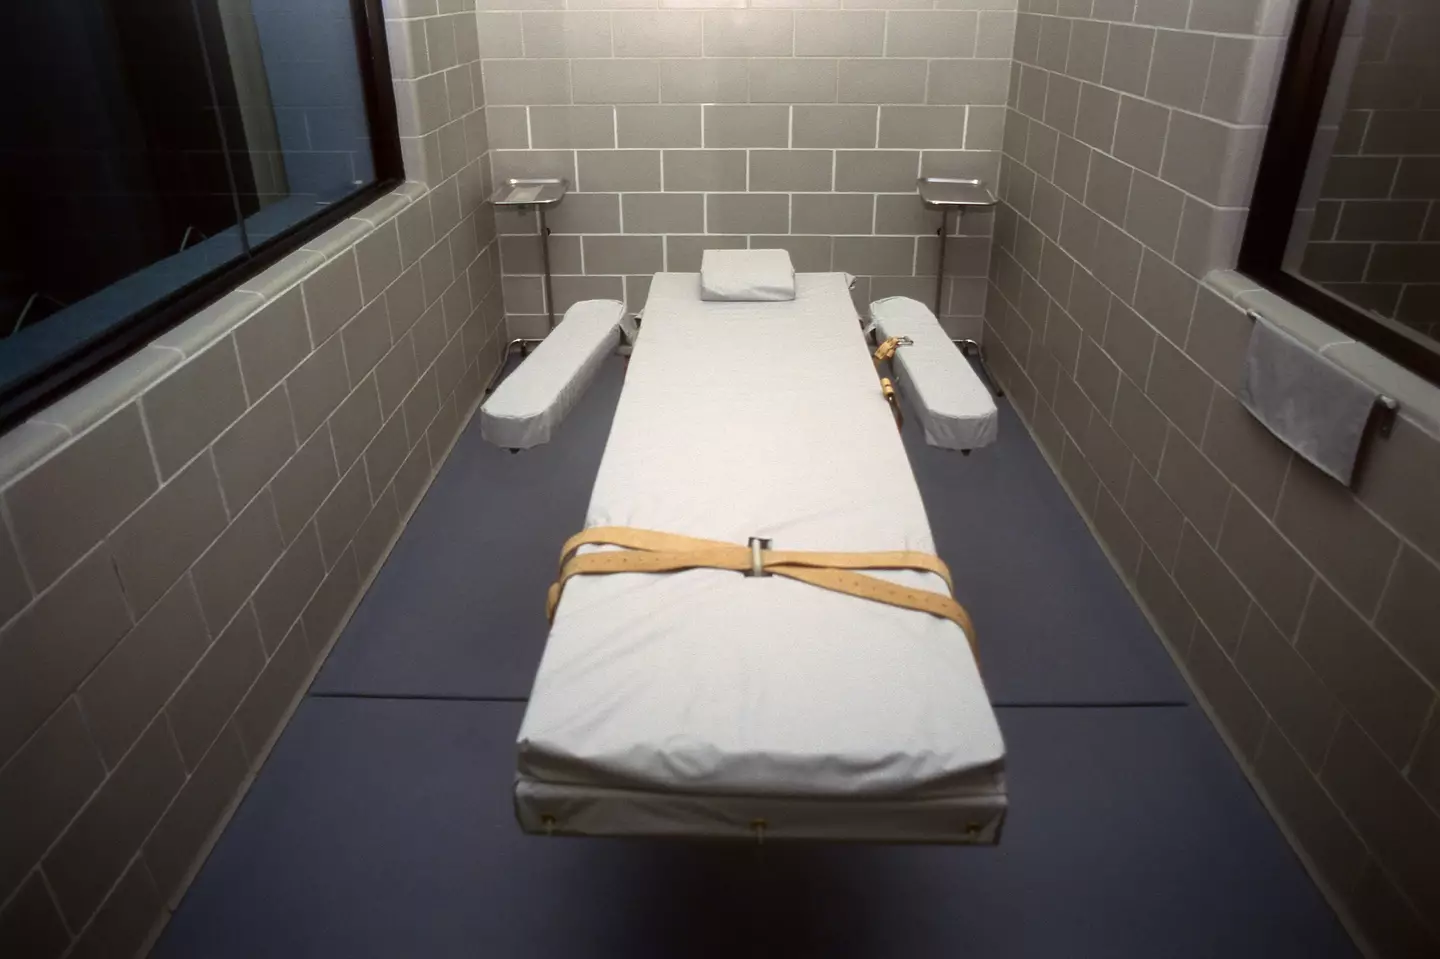 The new method could be offered as an alternative to lethal injection.